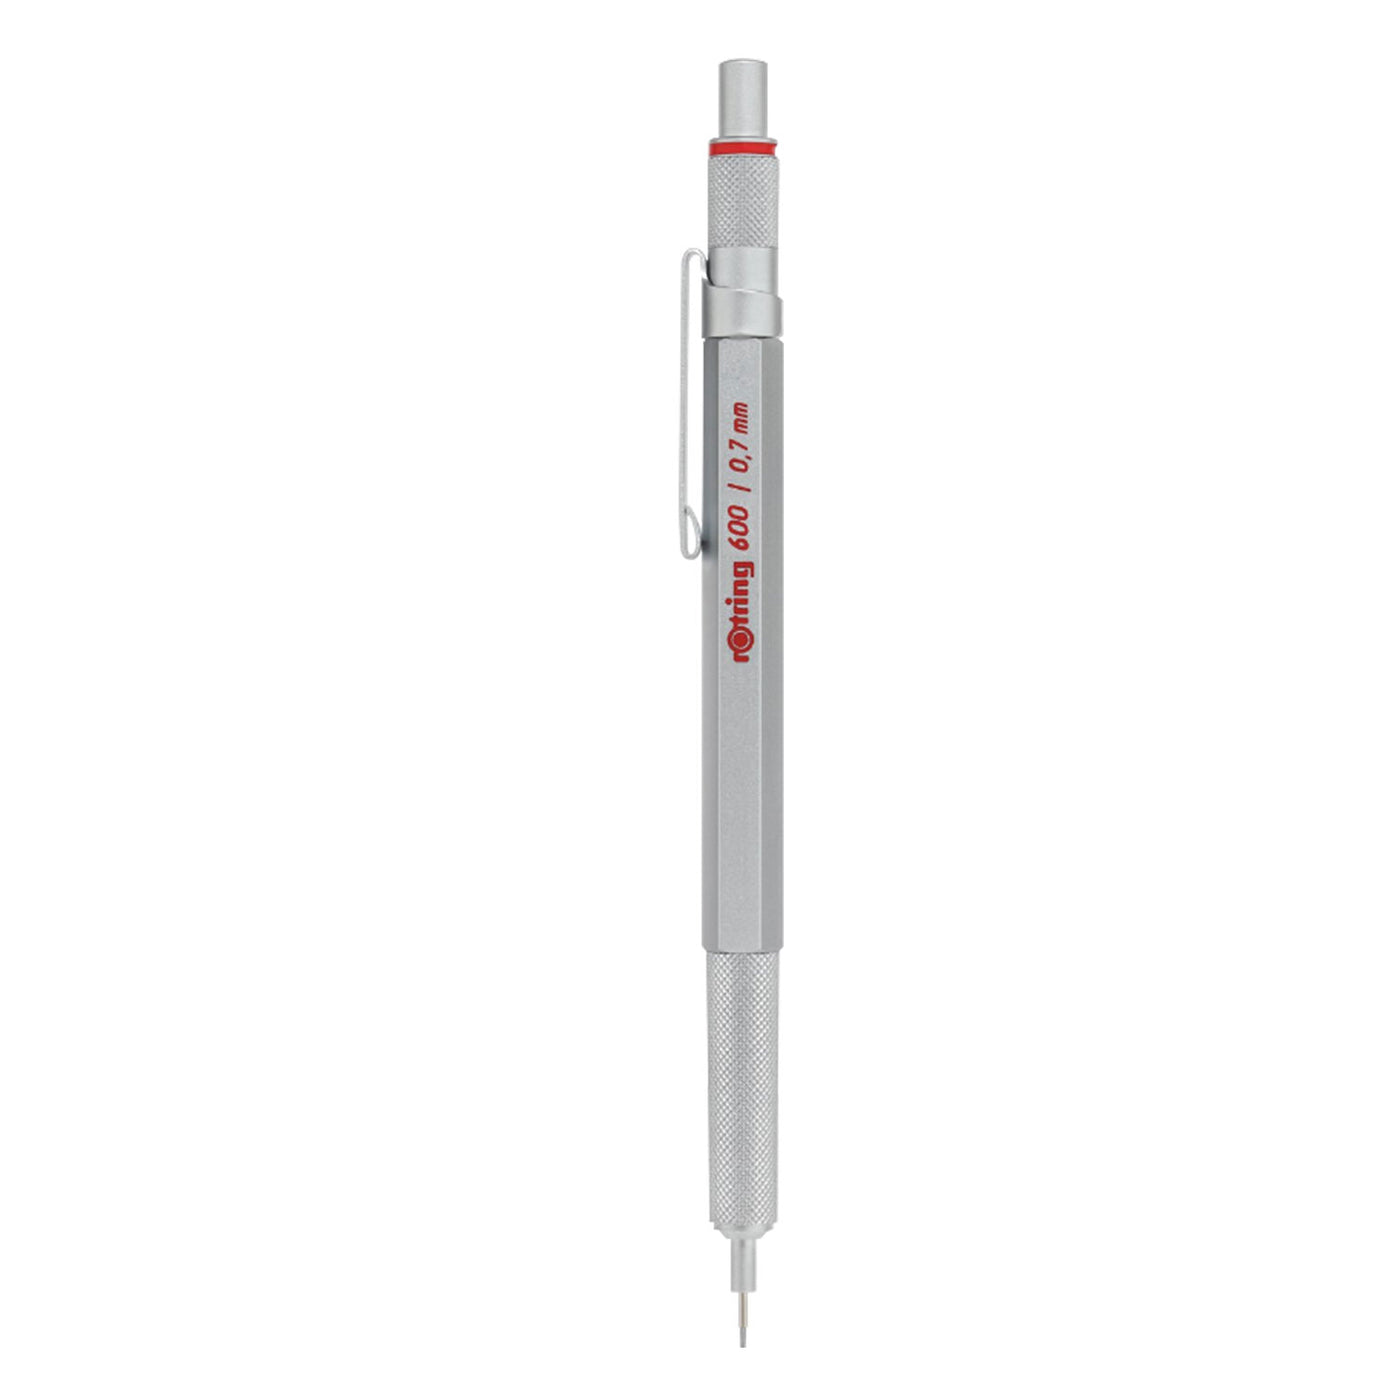 Rotring 600 0.7mm Mechanical Pencil - Silver